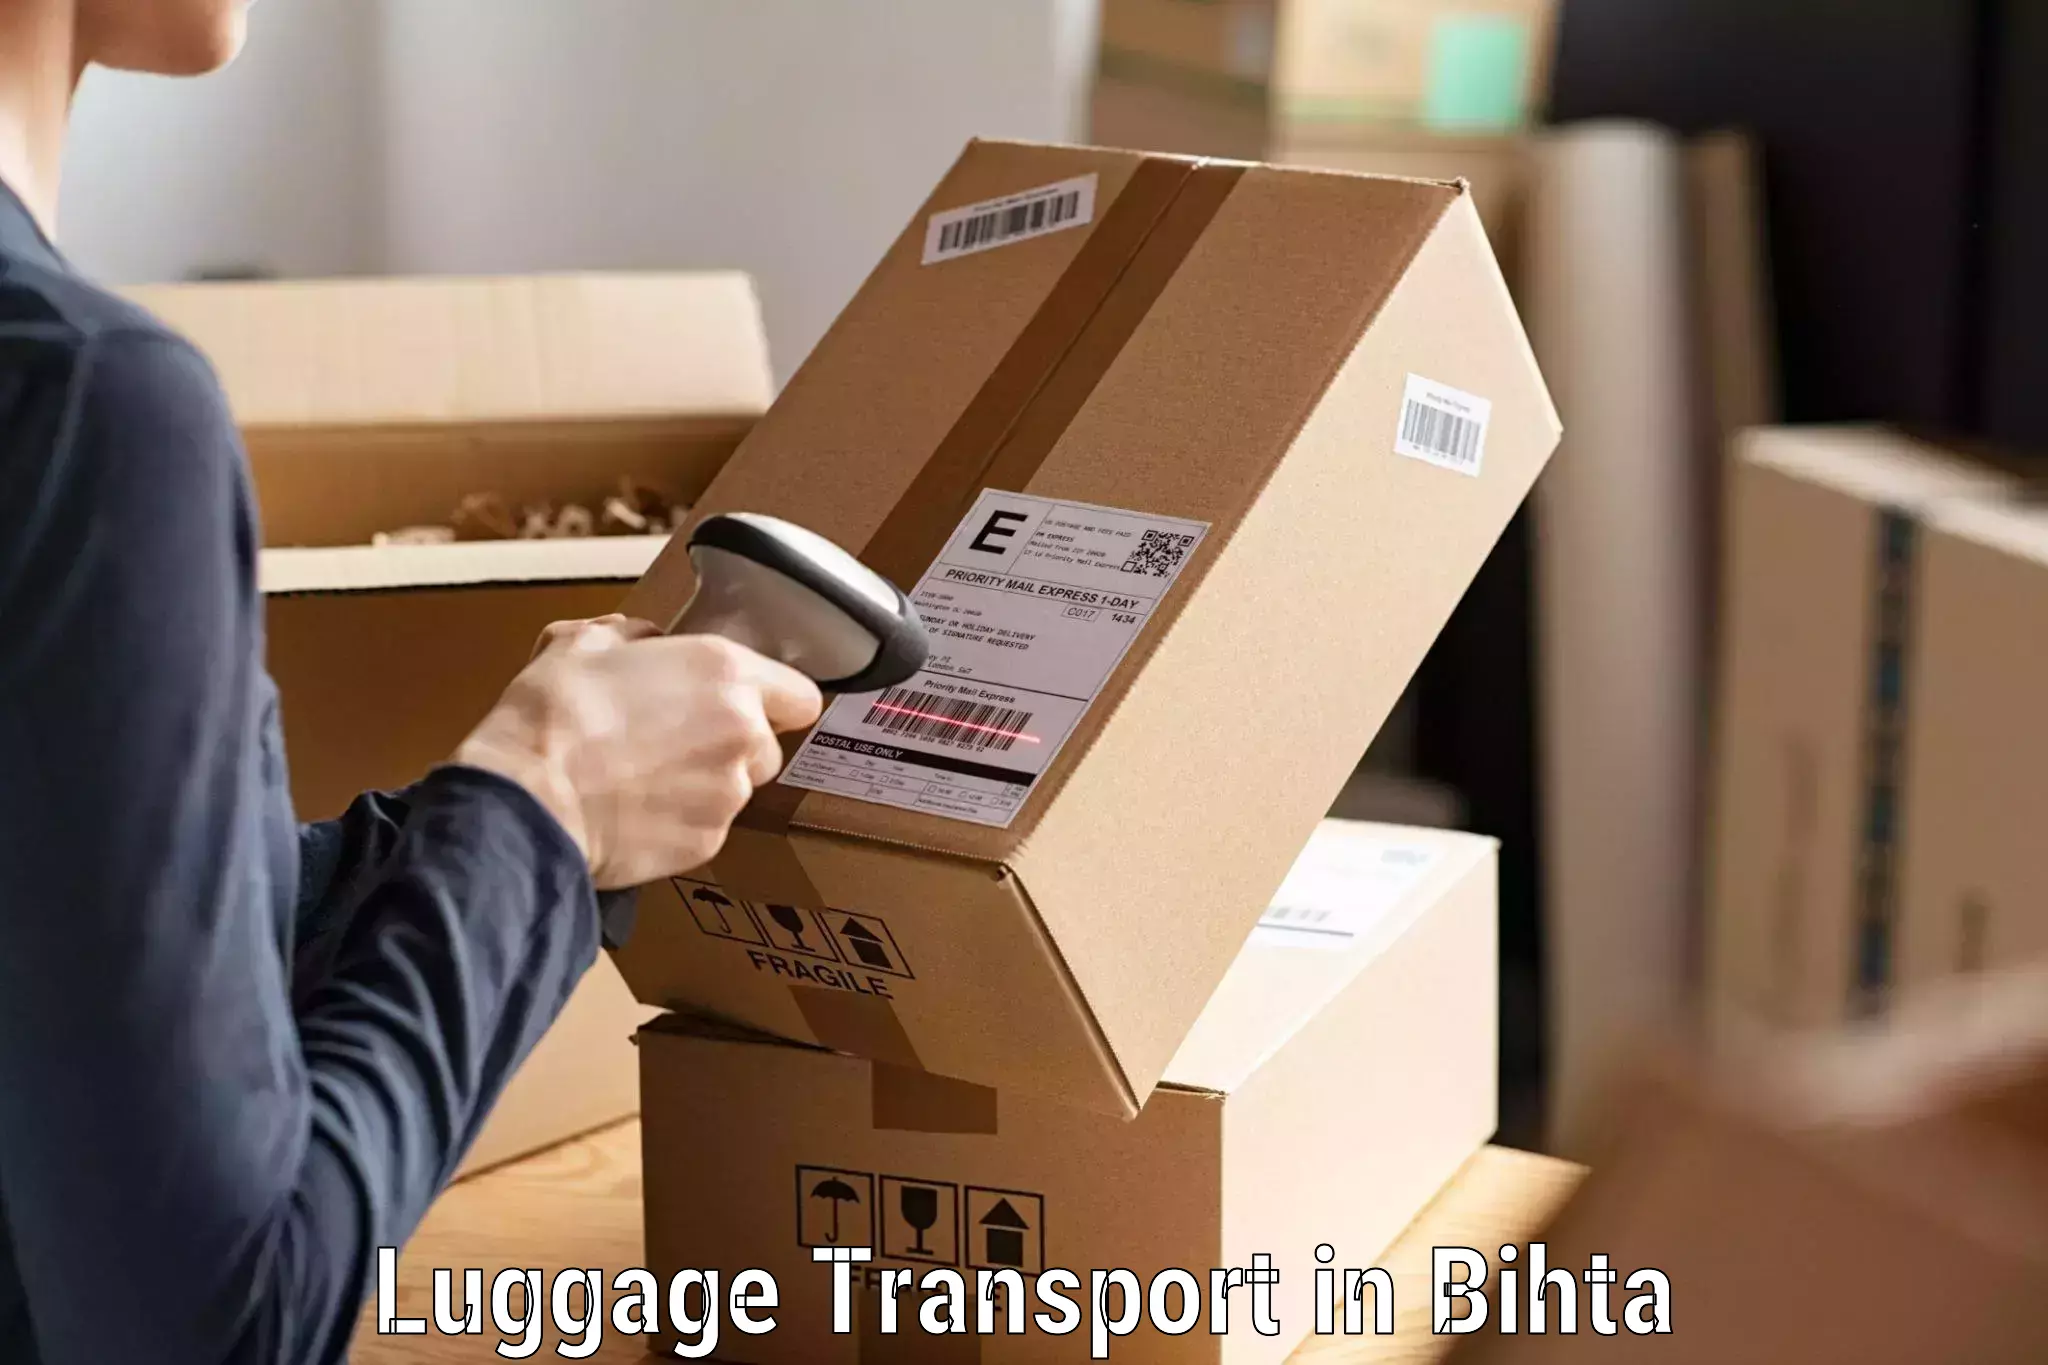 Baggage delivery management in Bihta